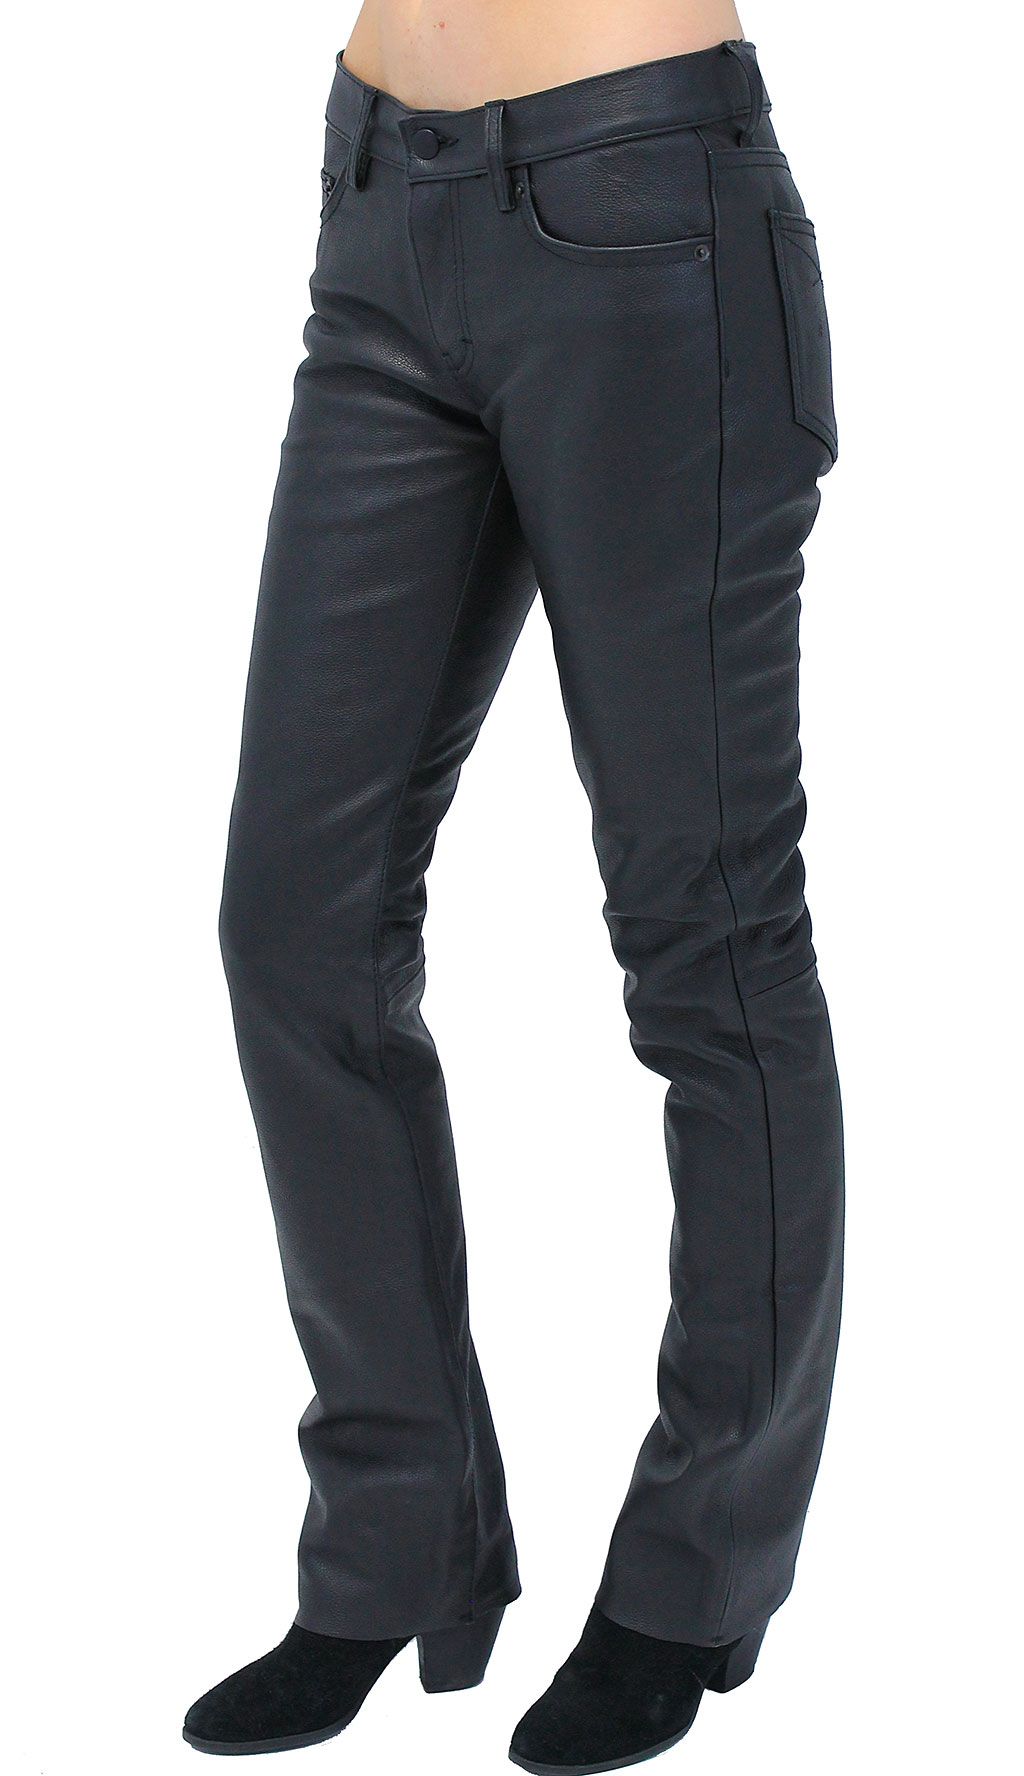 Women's black leather pants in a mid-rise classic five pocket design.